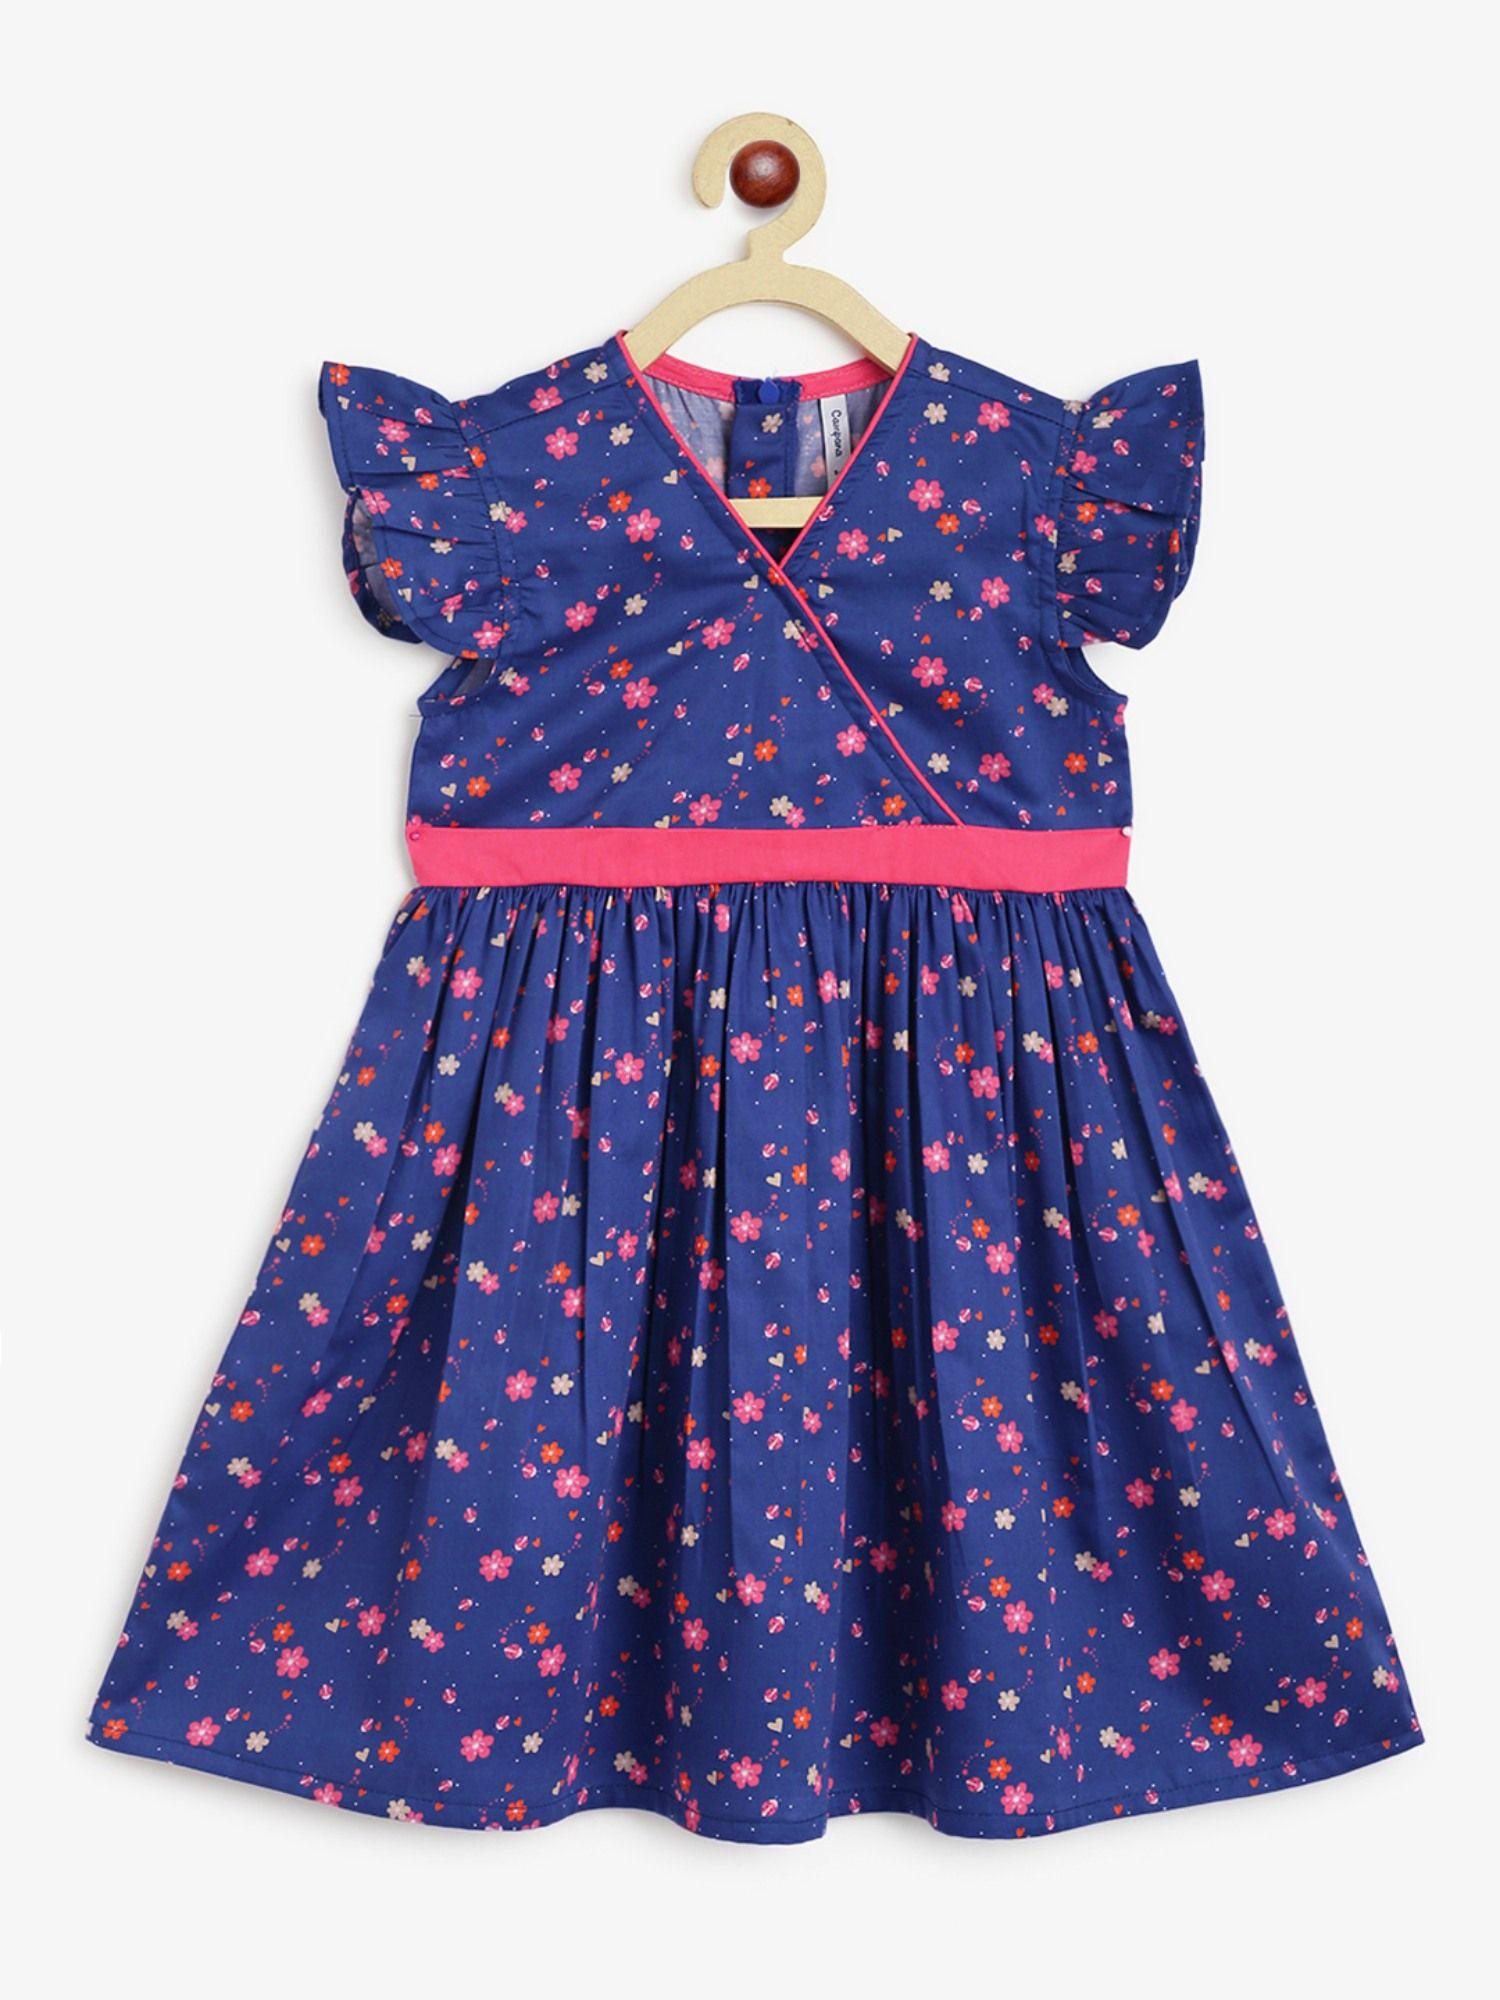 girls cotton ruby crossover dress - baby flower print - navy and pink